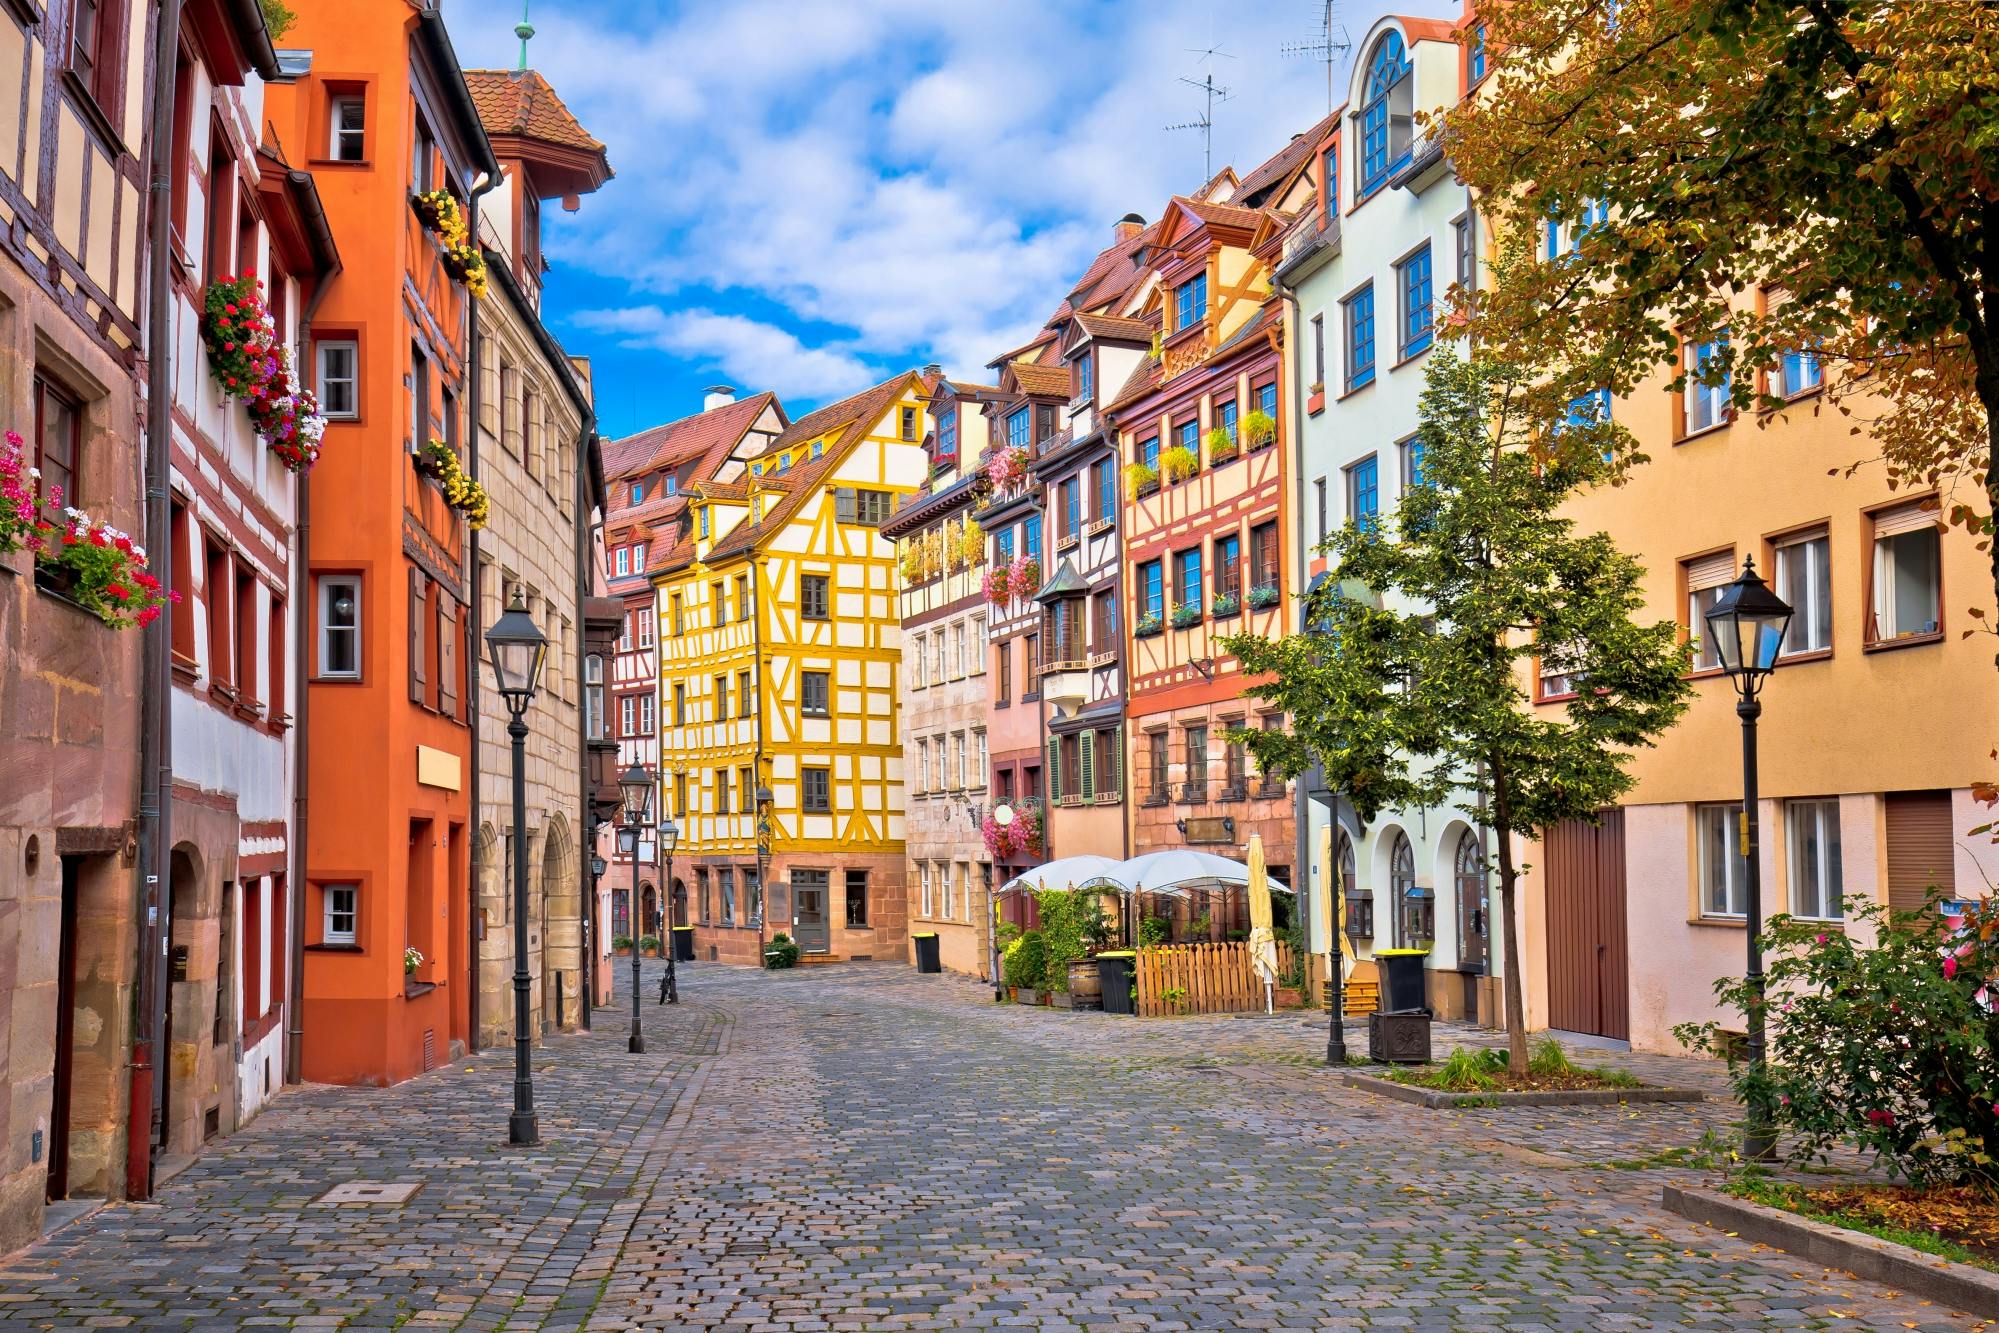 1.5-hour guided walking tour of Nuremberg's Old Town